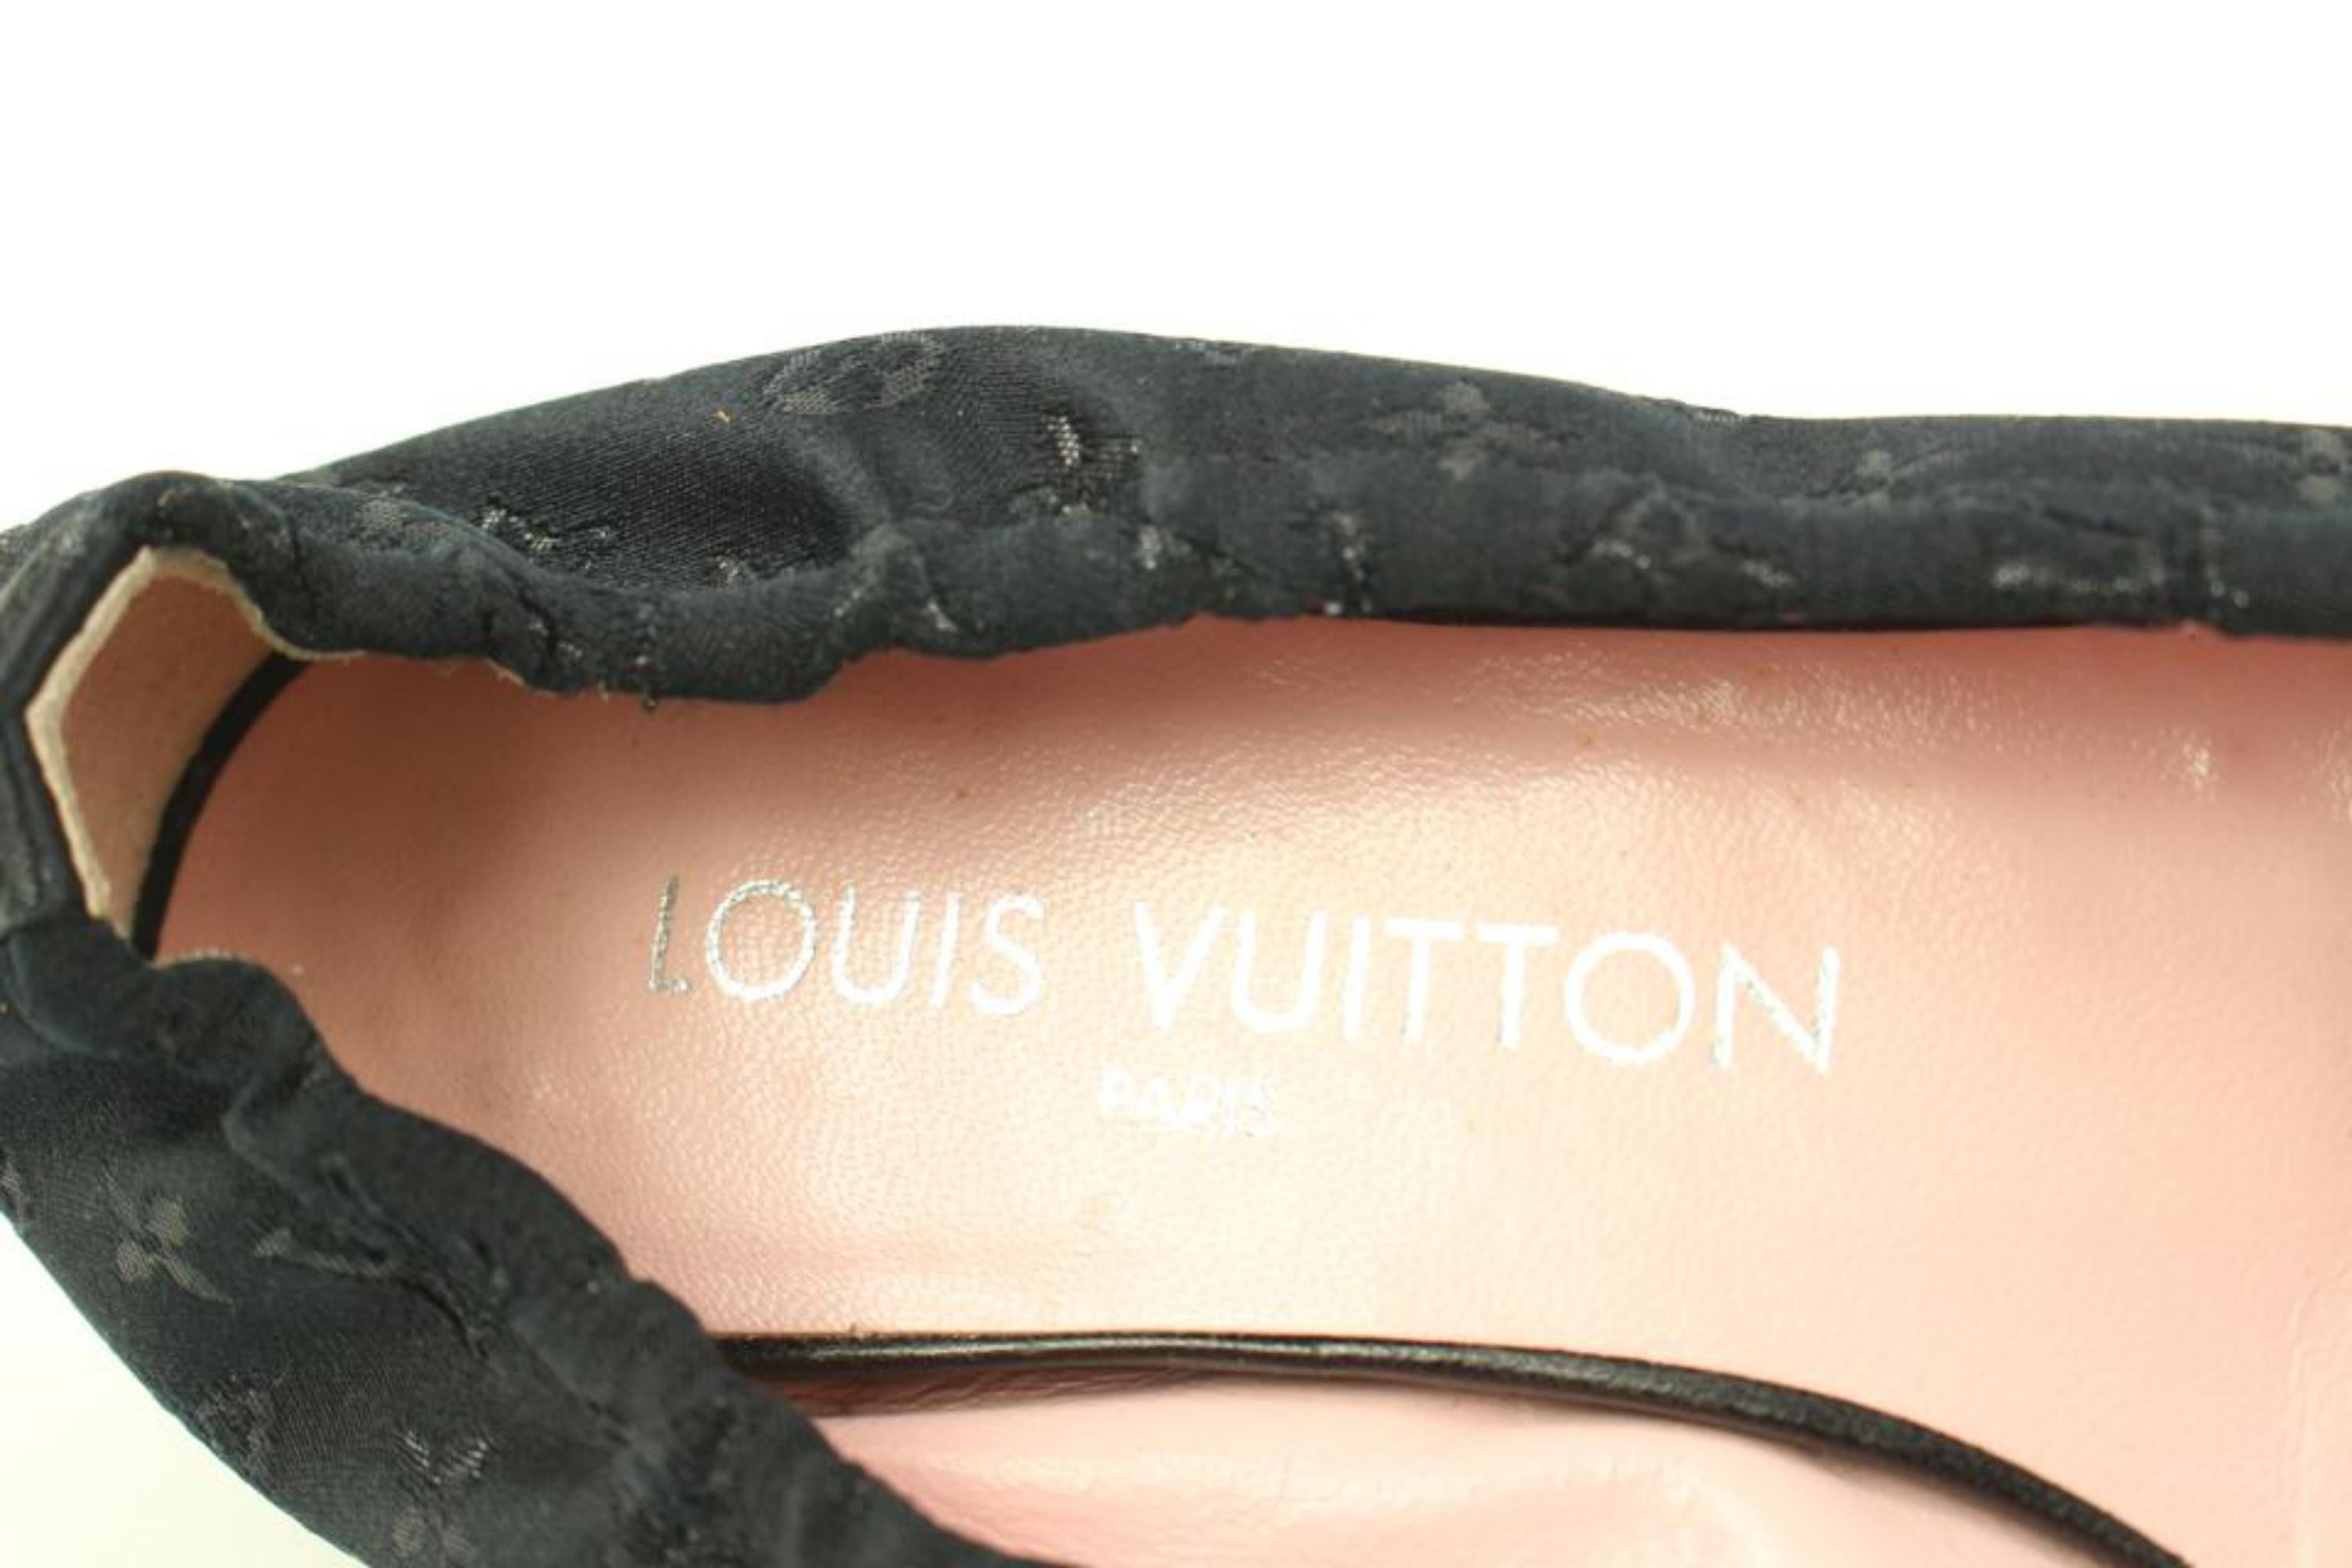 Louis Vuitton Size 34.5 Black Monogram Satin Ballerina Flats 62lv32s In Good Condition For Sale In Dix hills, NY